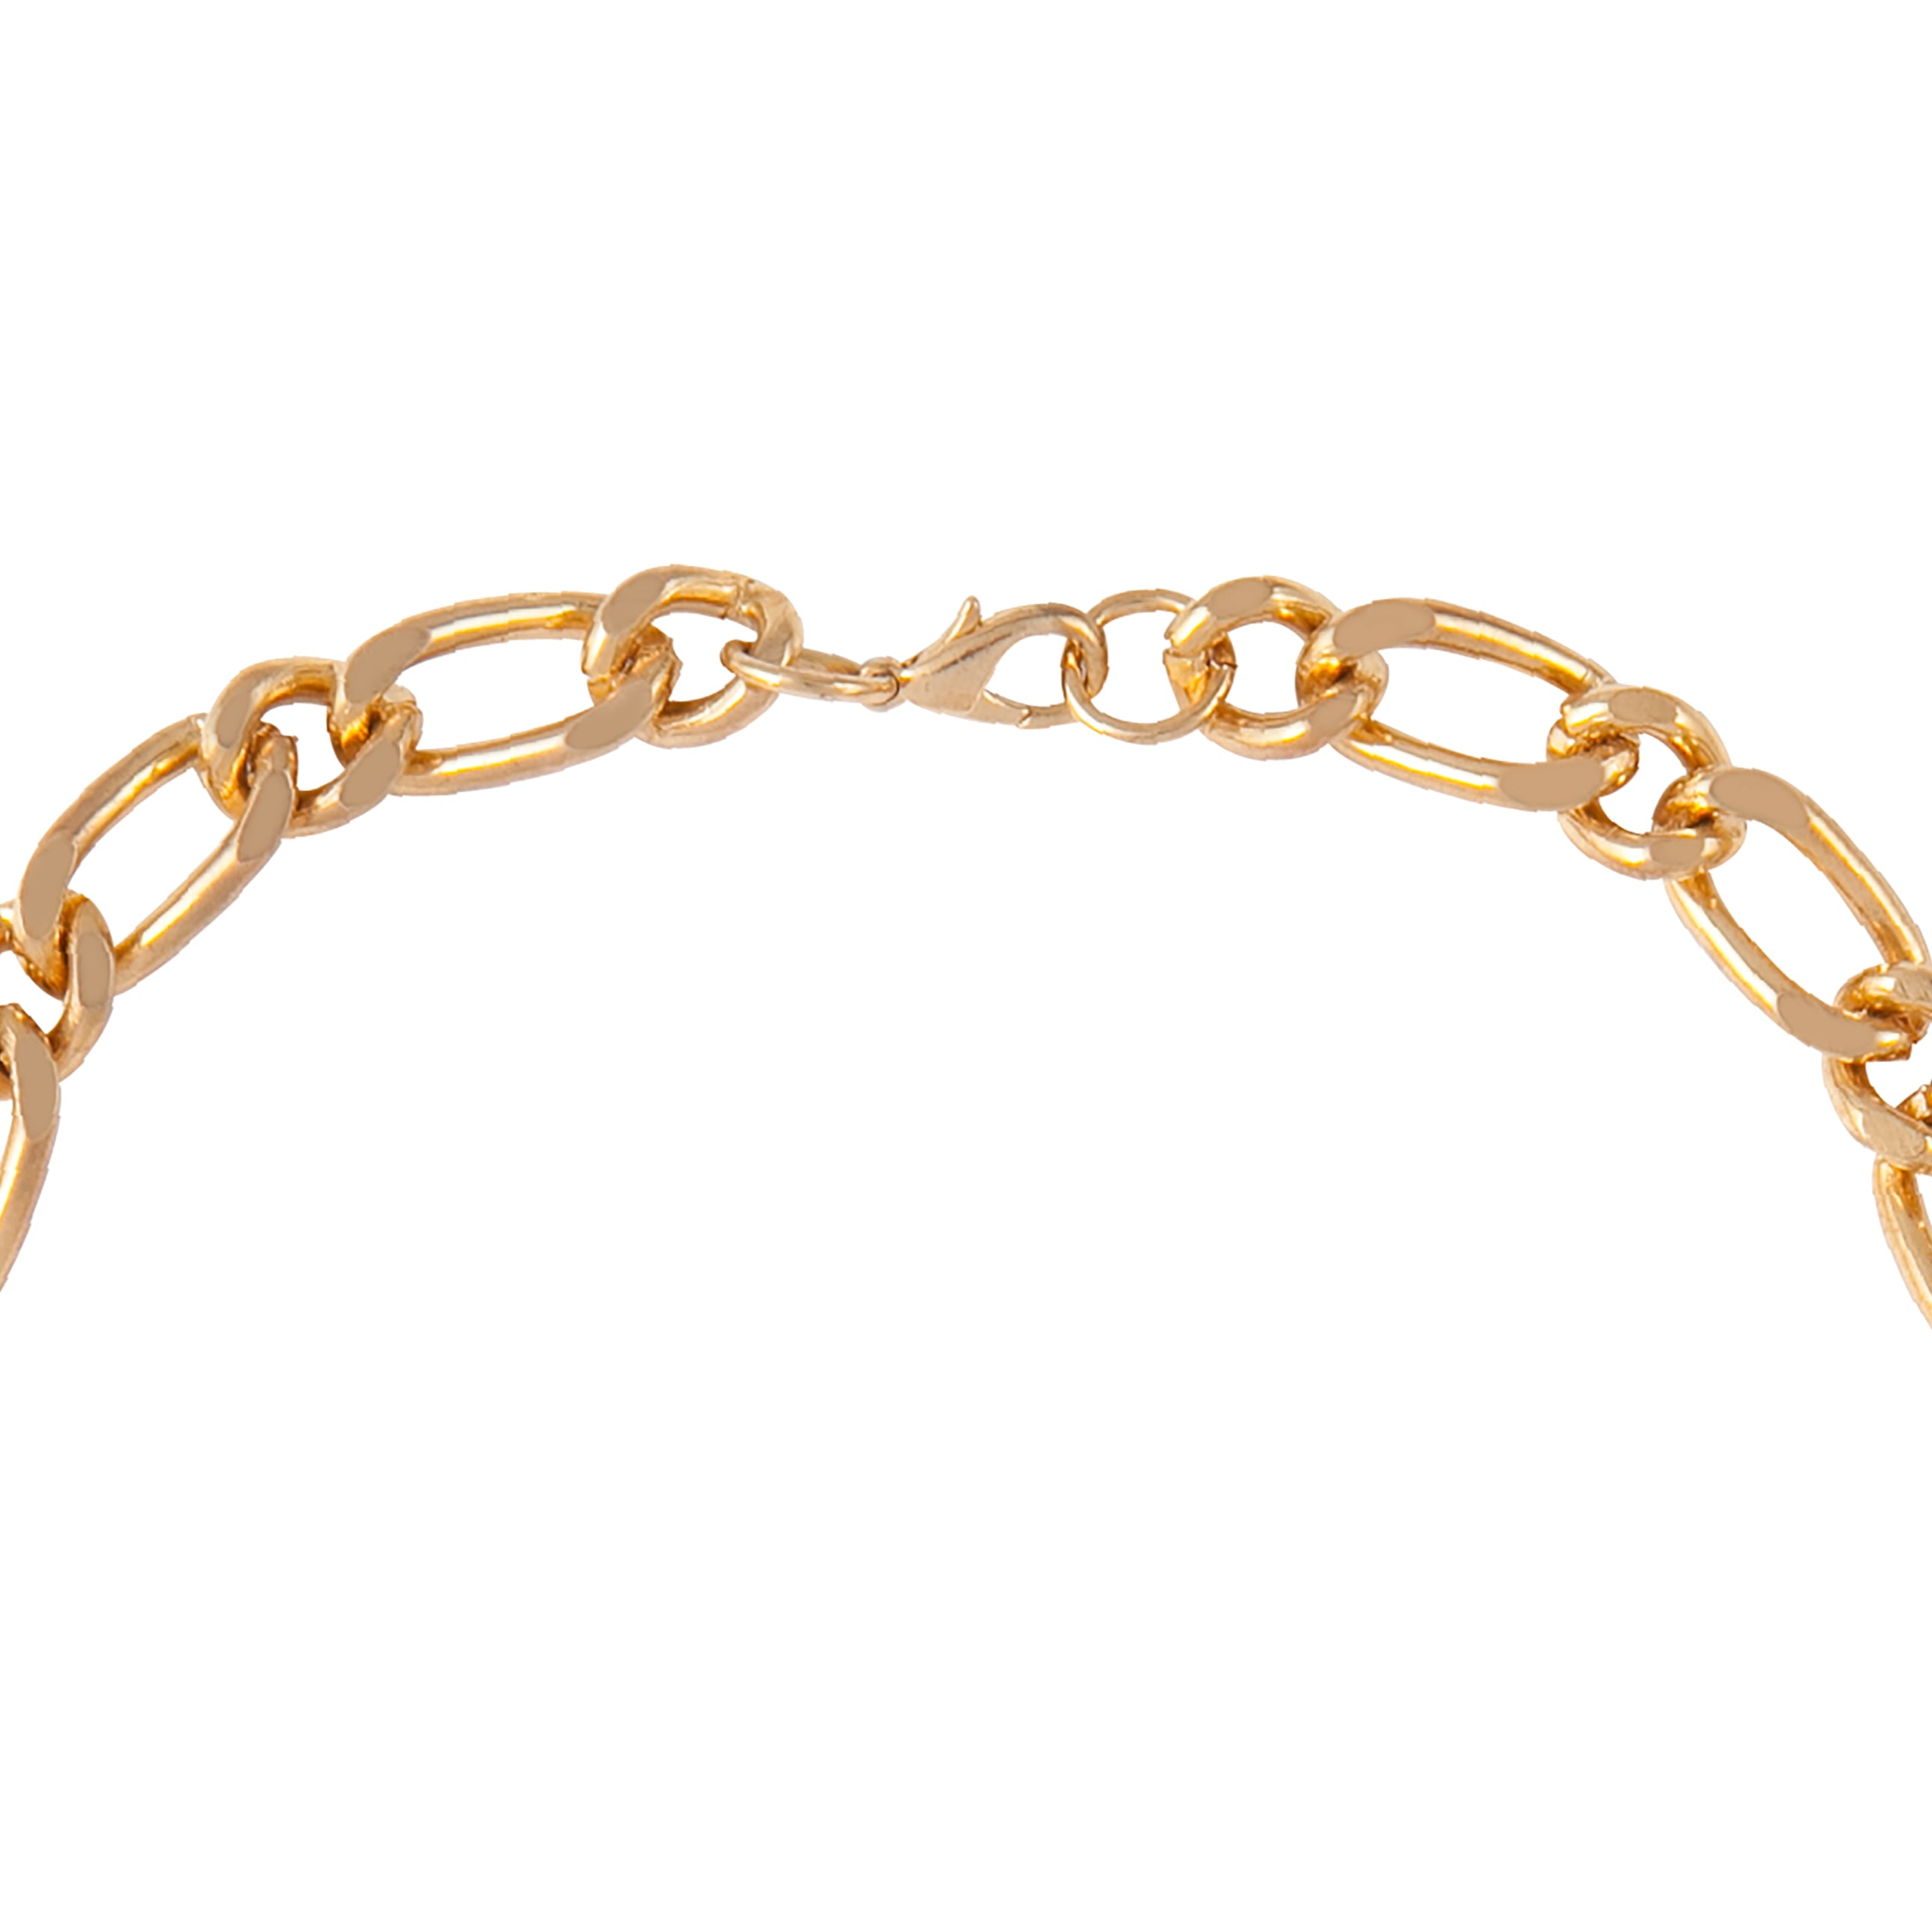 1990s Vintage 22ct Gold Plated Chain Necklace